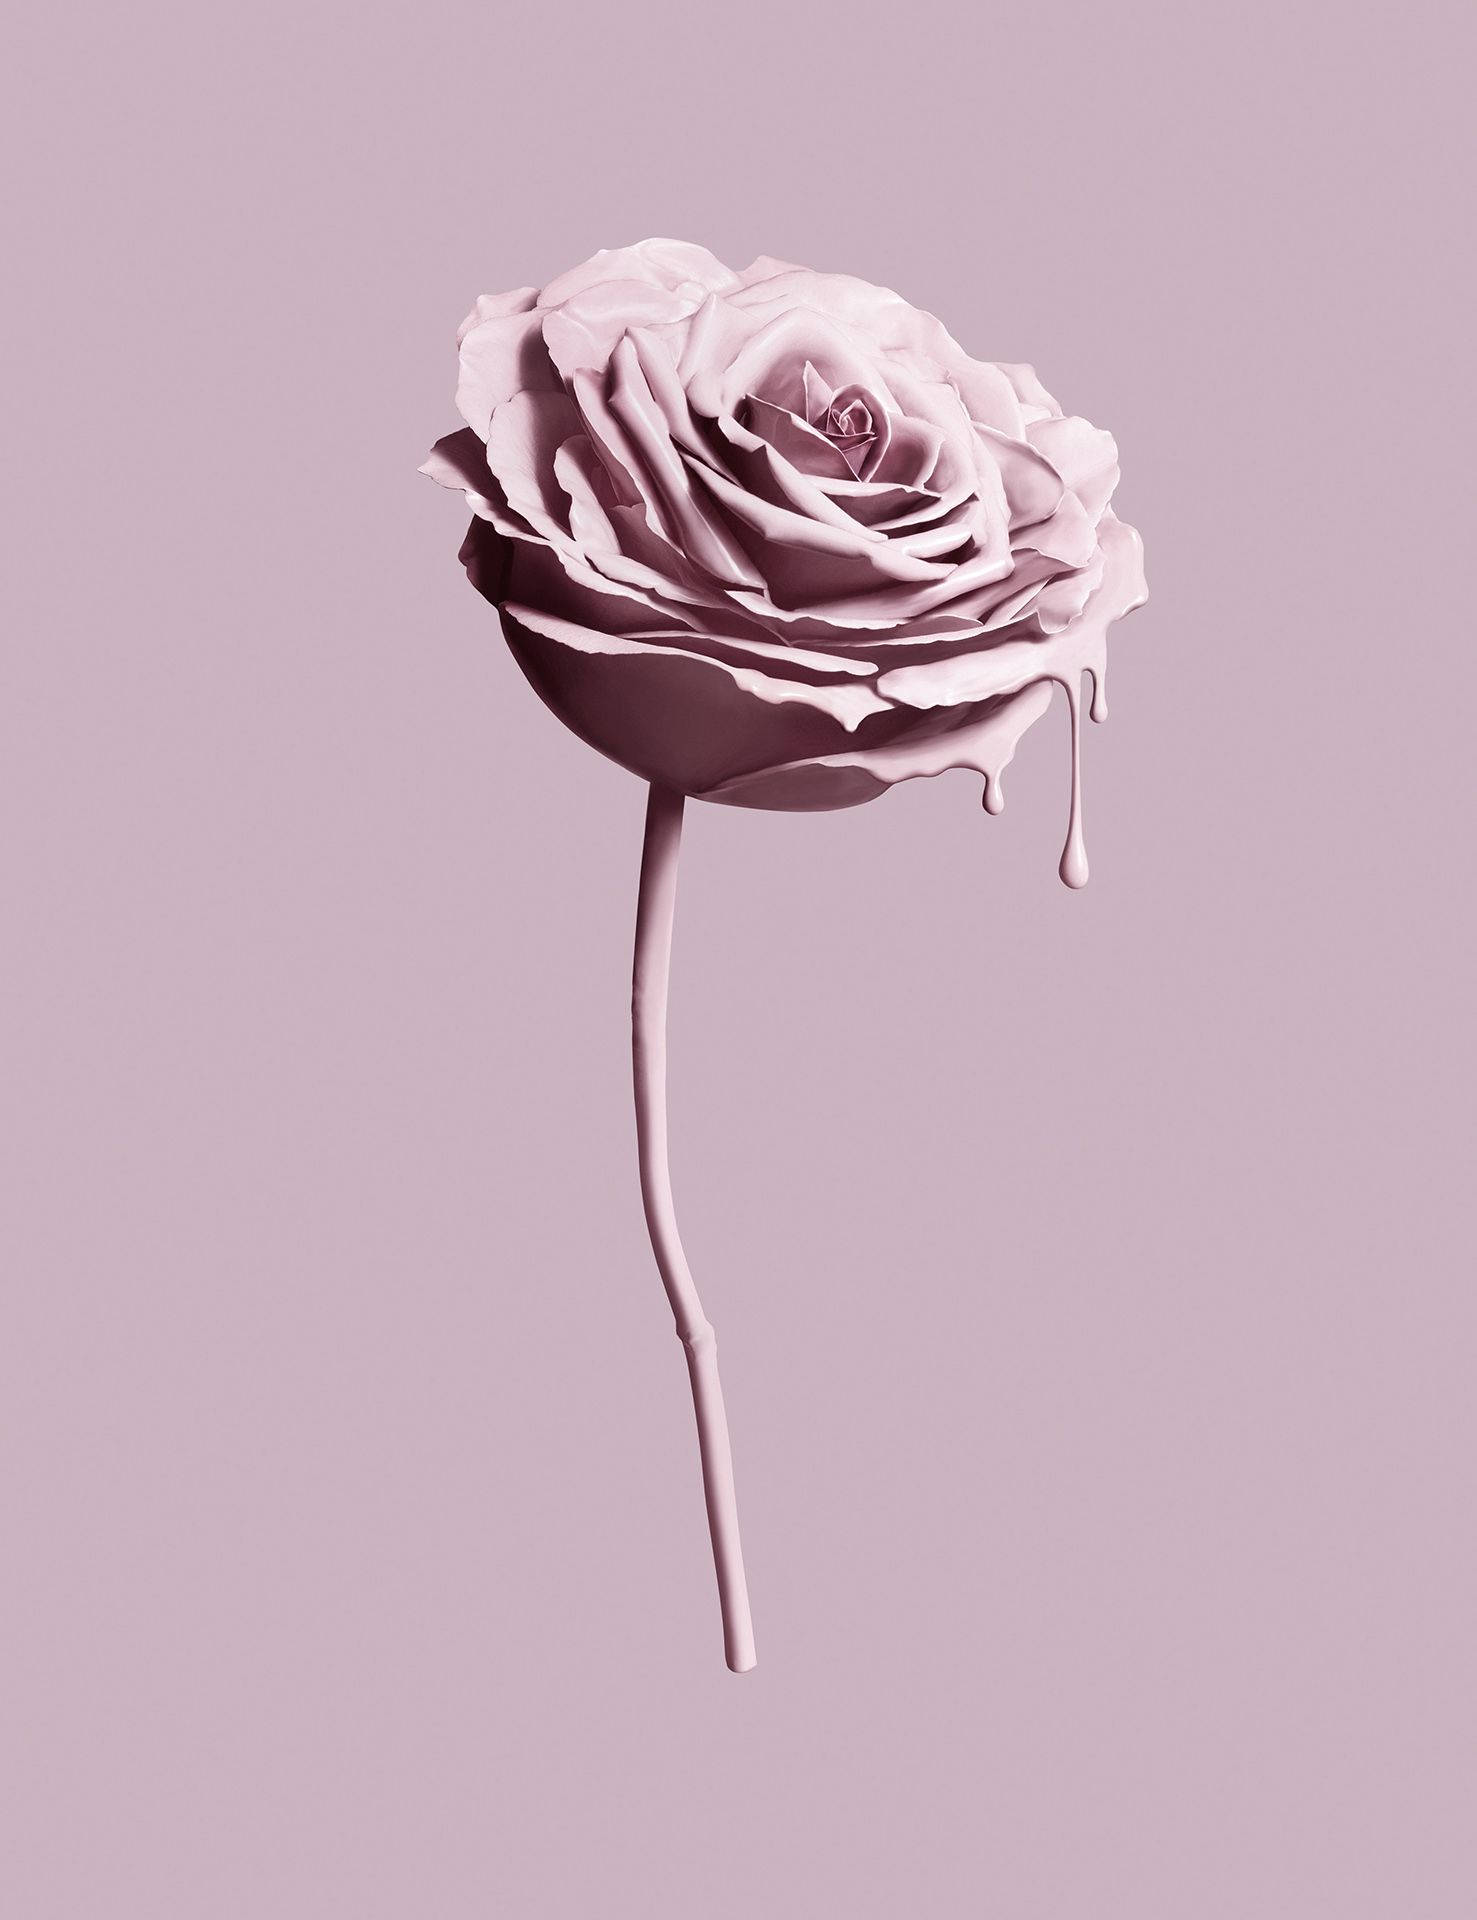 Pink Rose Tumblr Aesthetic Background